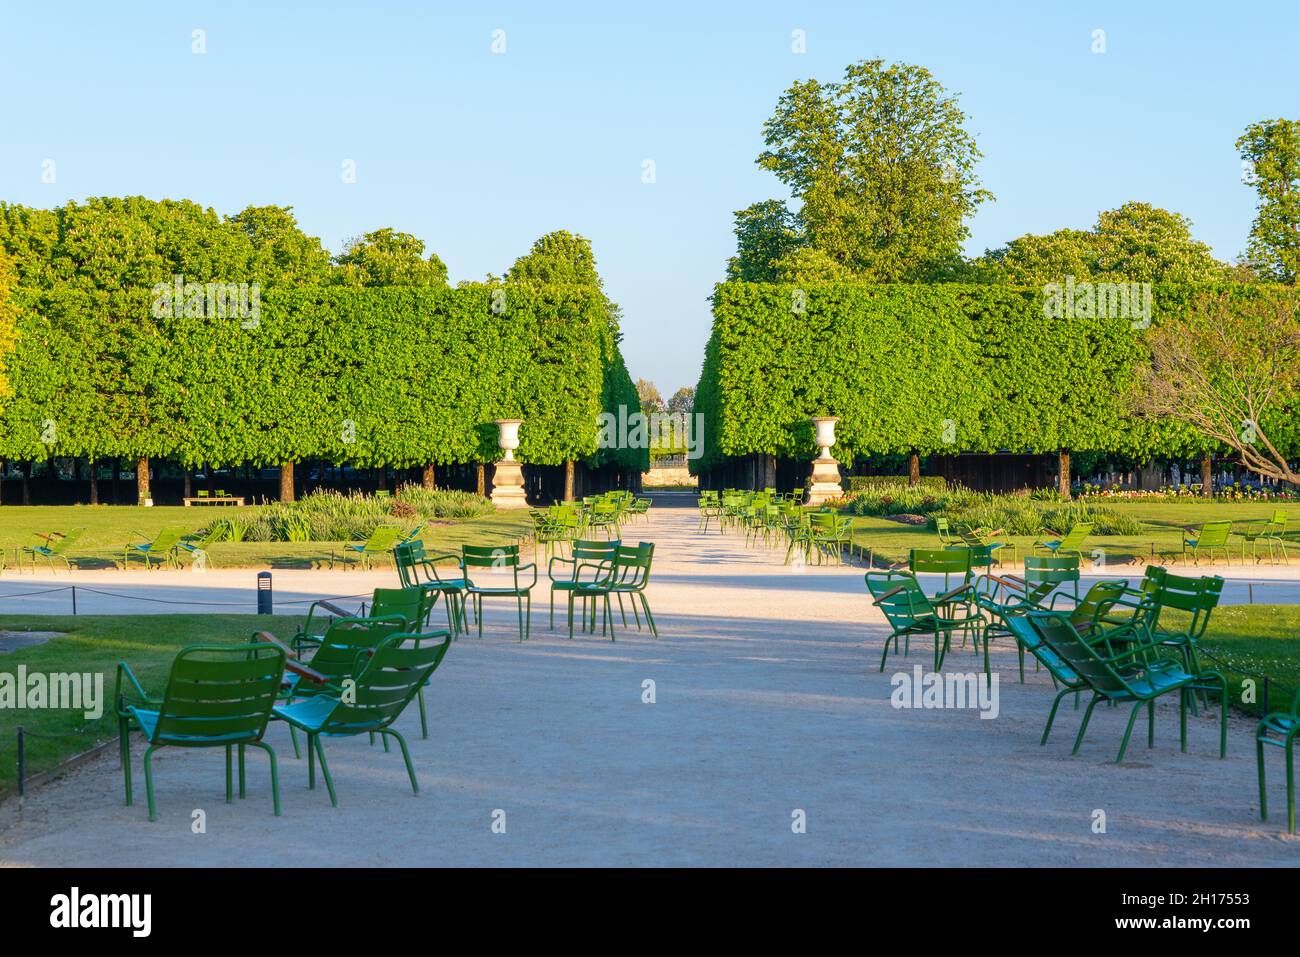 Stone urns and empty chairs in the Tuileries garden in Paris along an alley with row of chestnut trees in the background, seen from afar and taken in Stock Photo